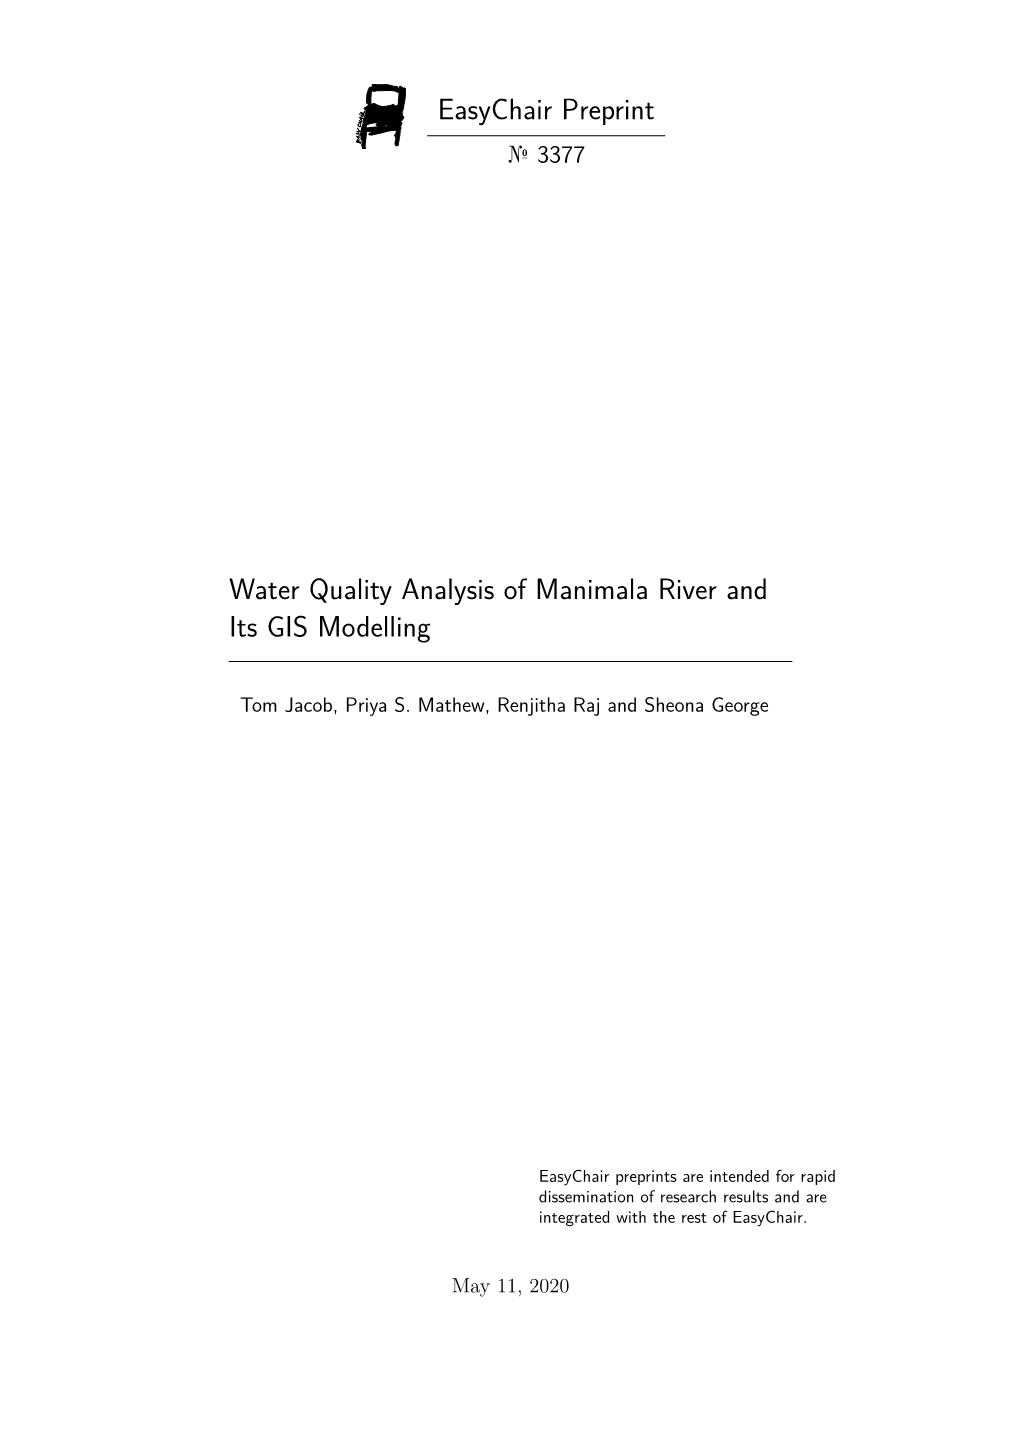 Easychair Preprint Water Quality Analysis of Manimala River and Its